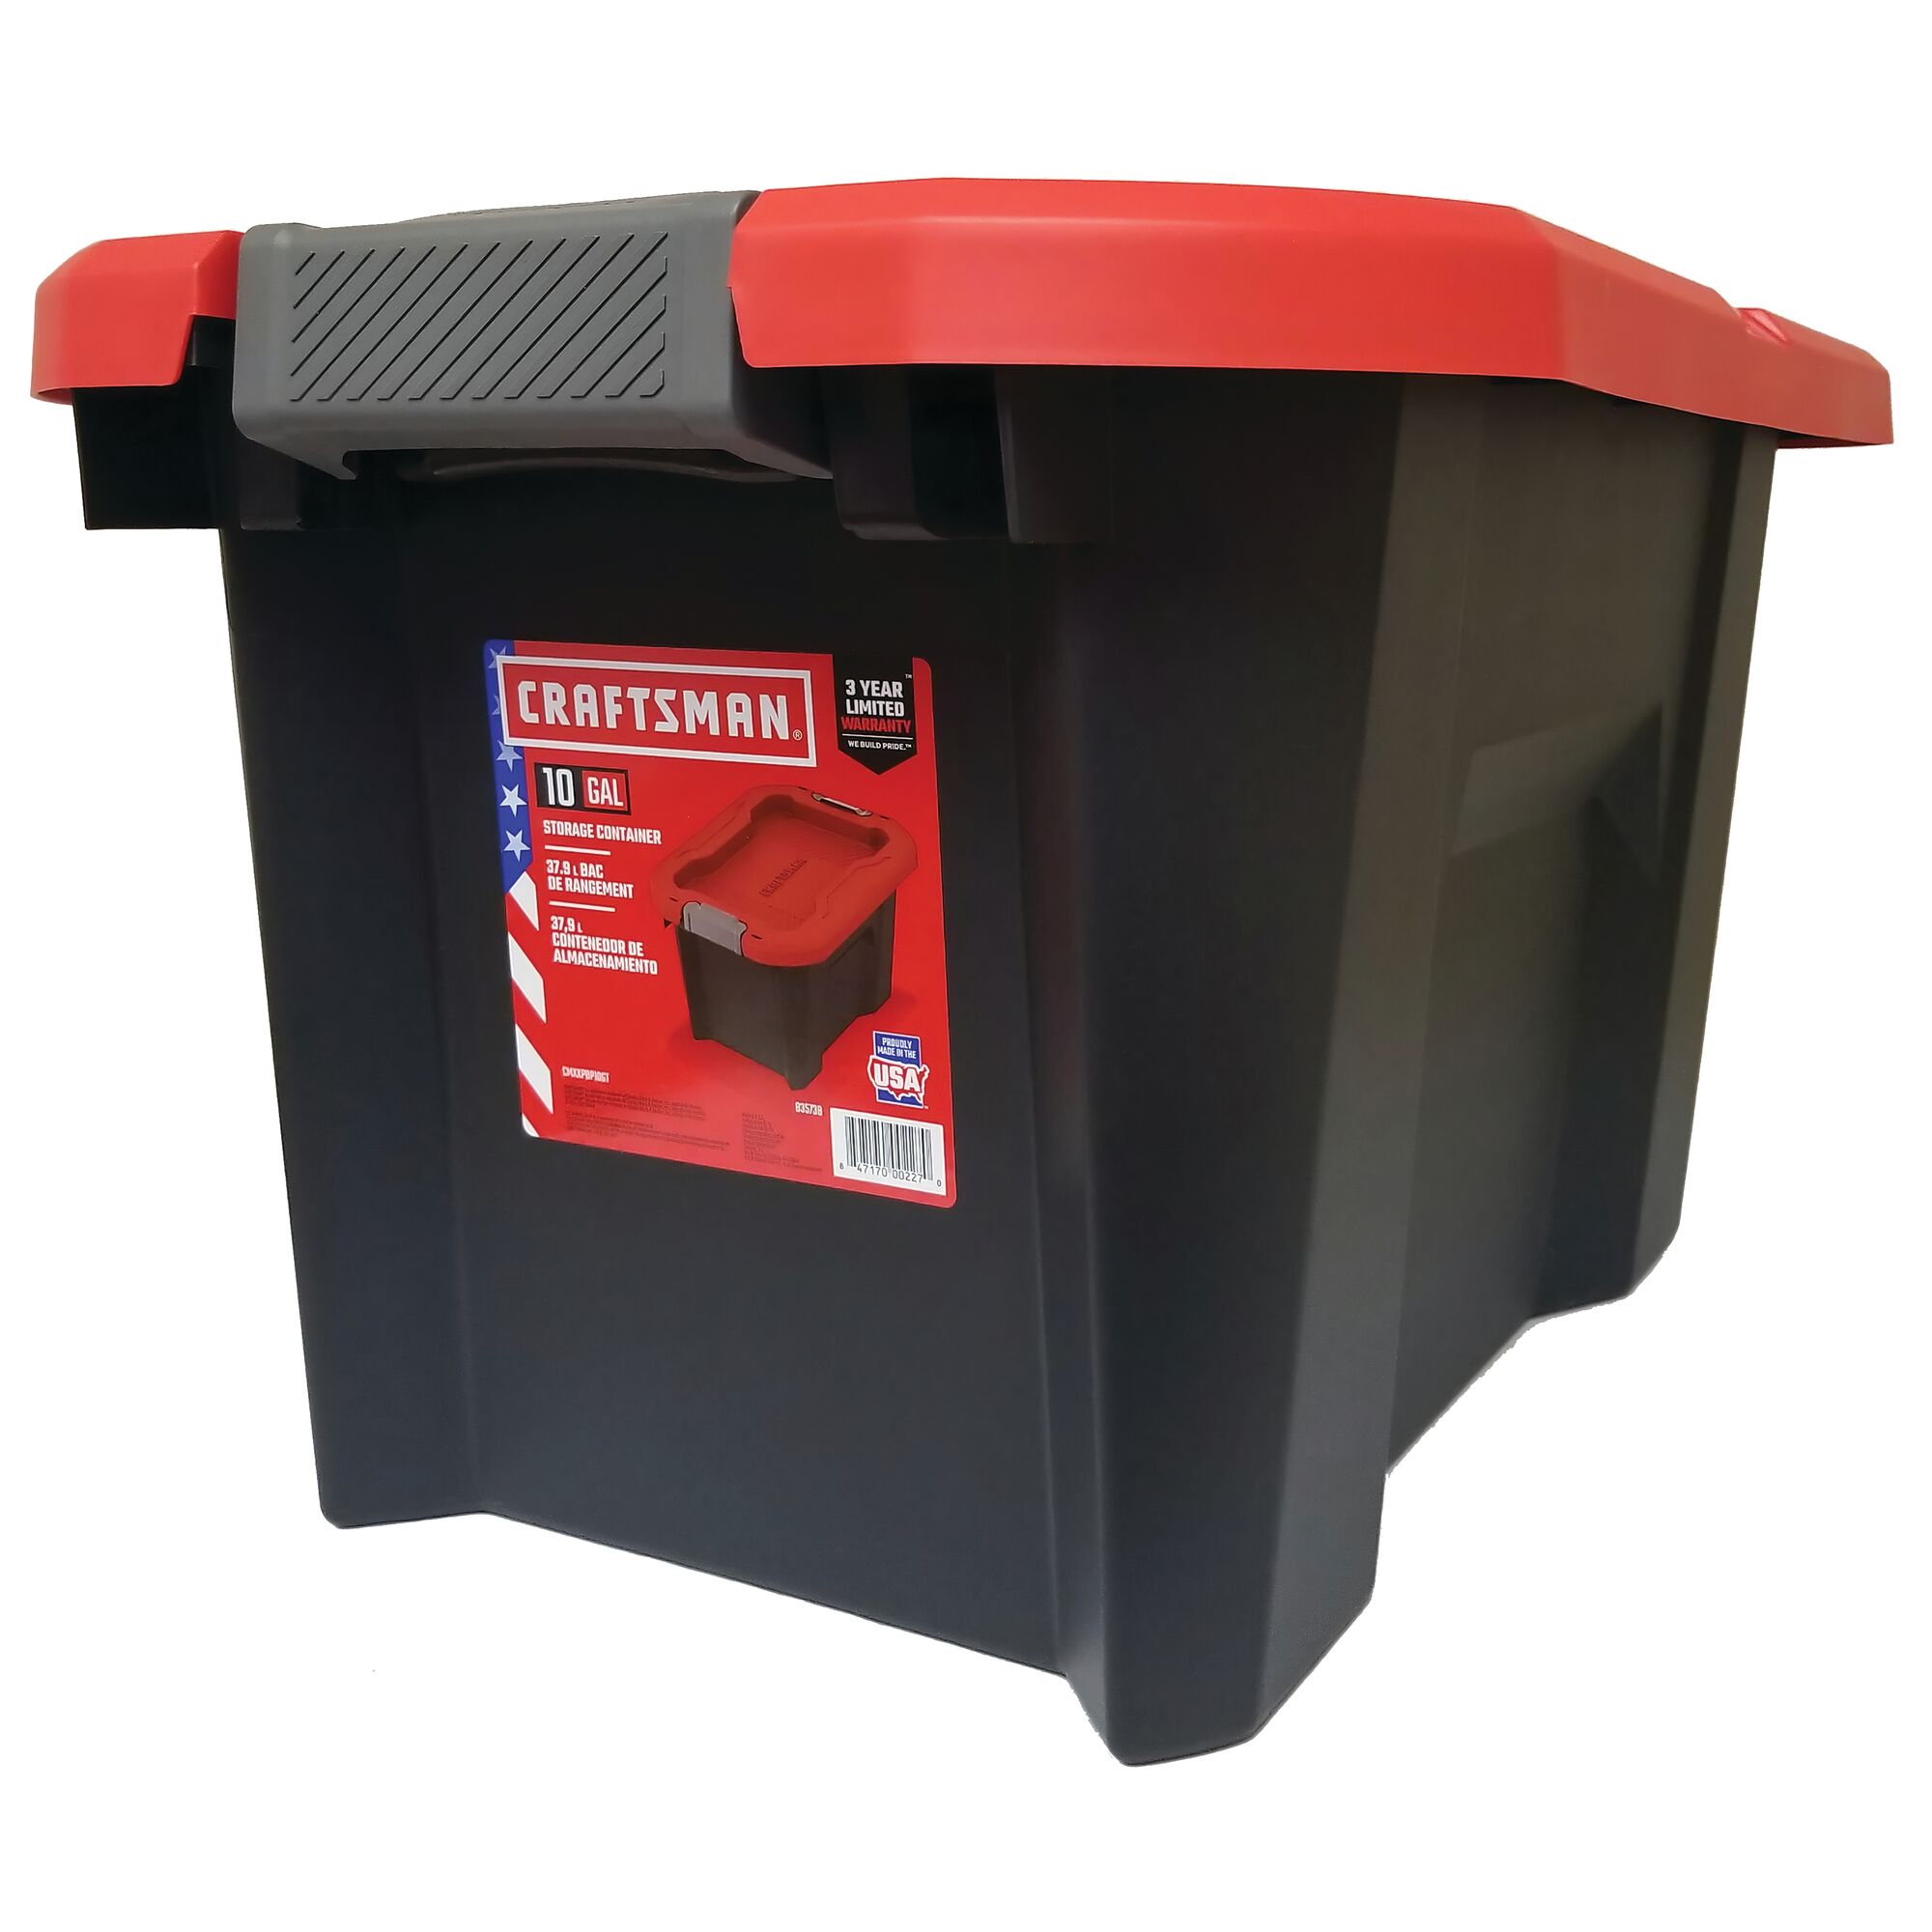 Right profile of 10 Gallon latching tote in packaging.